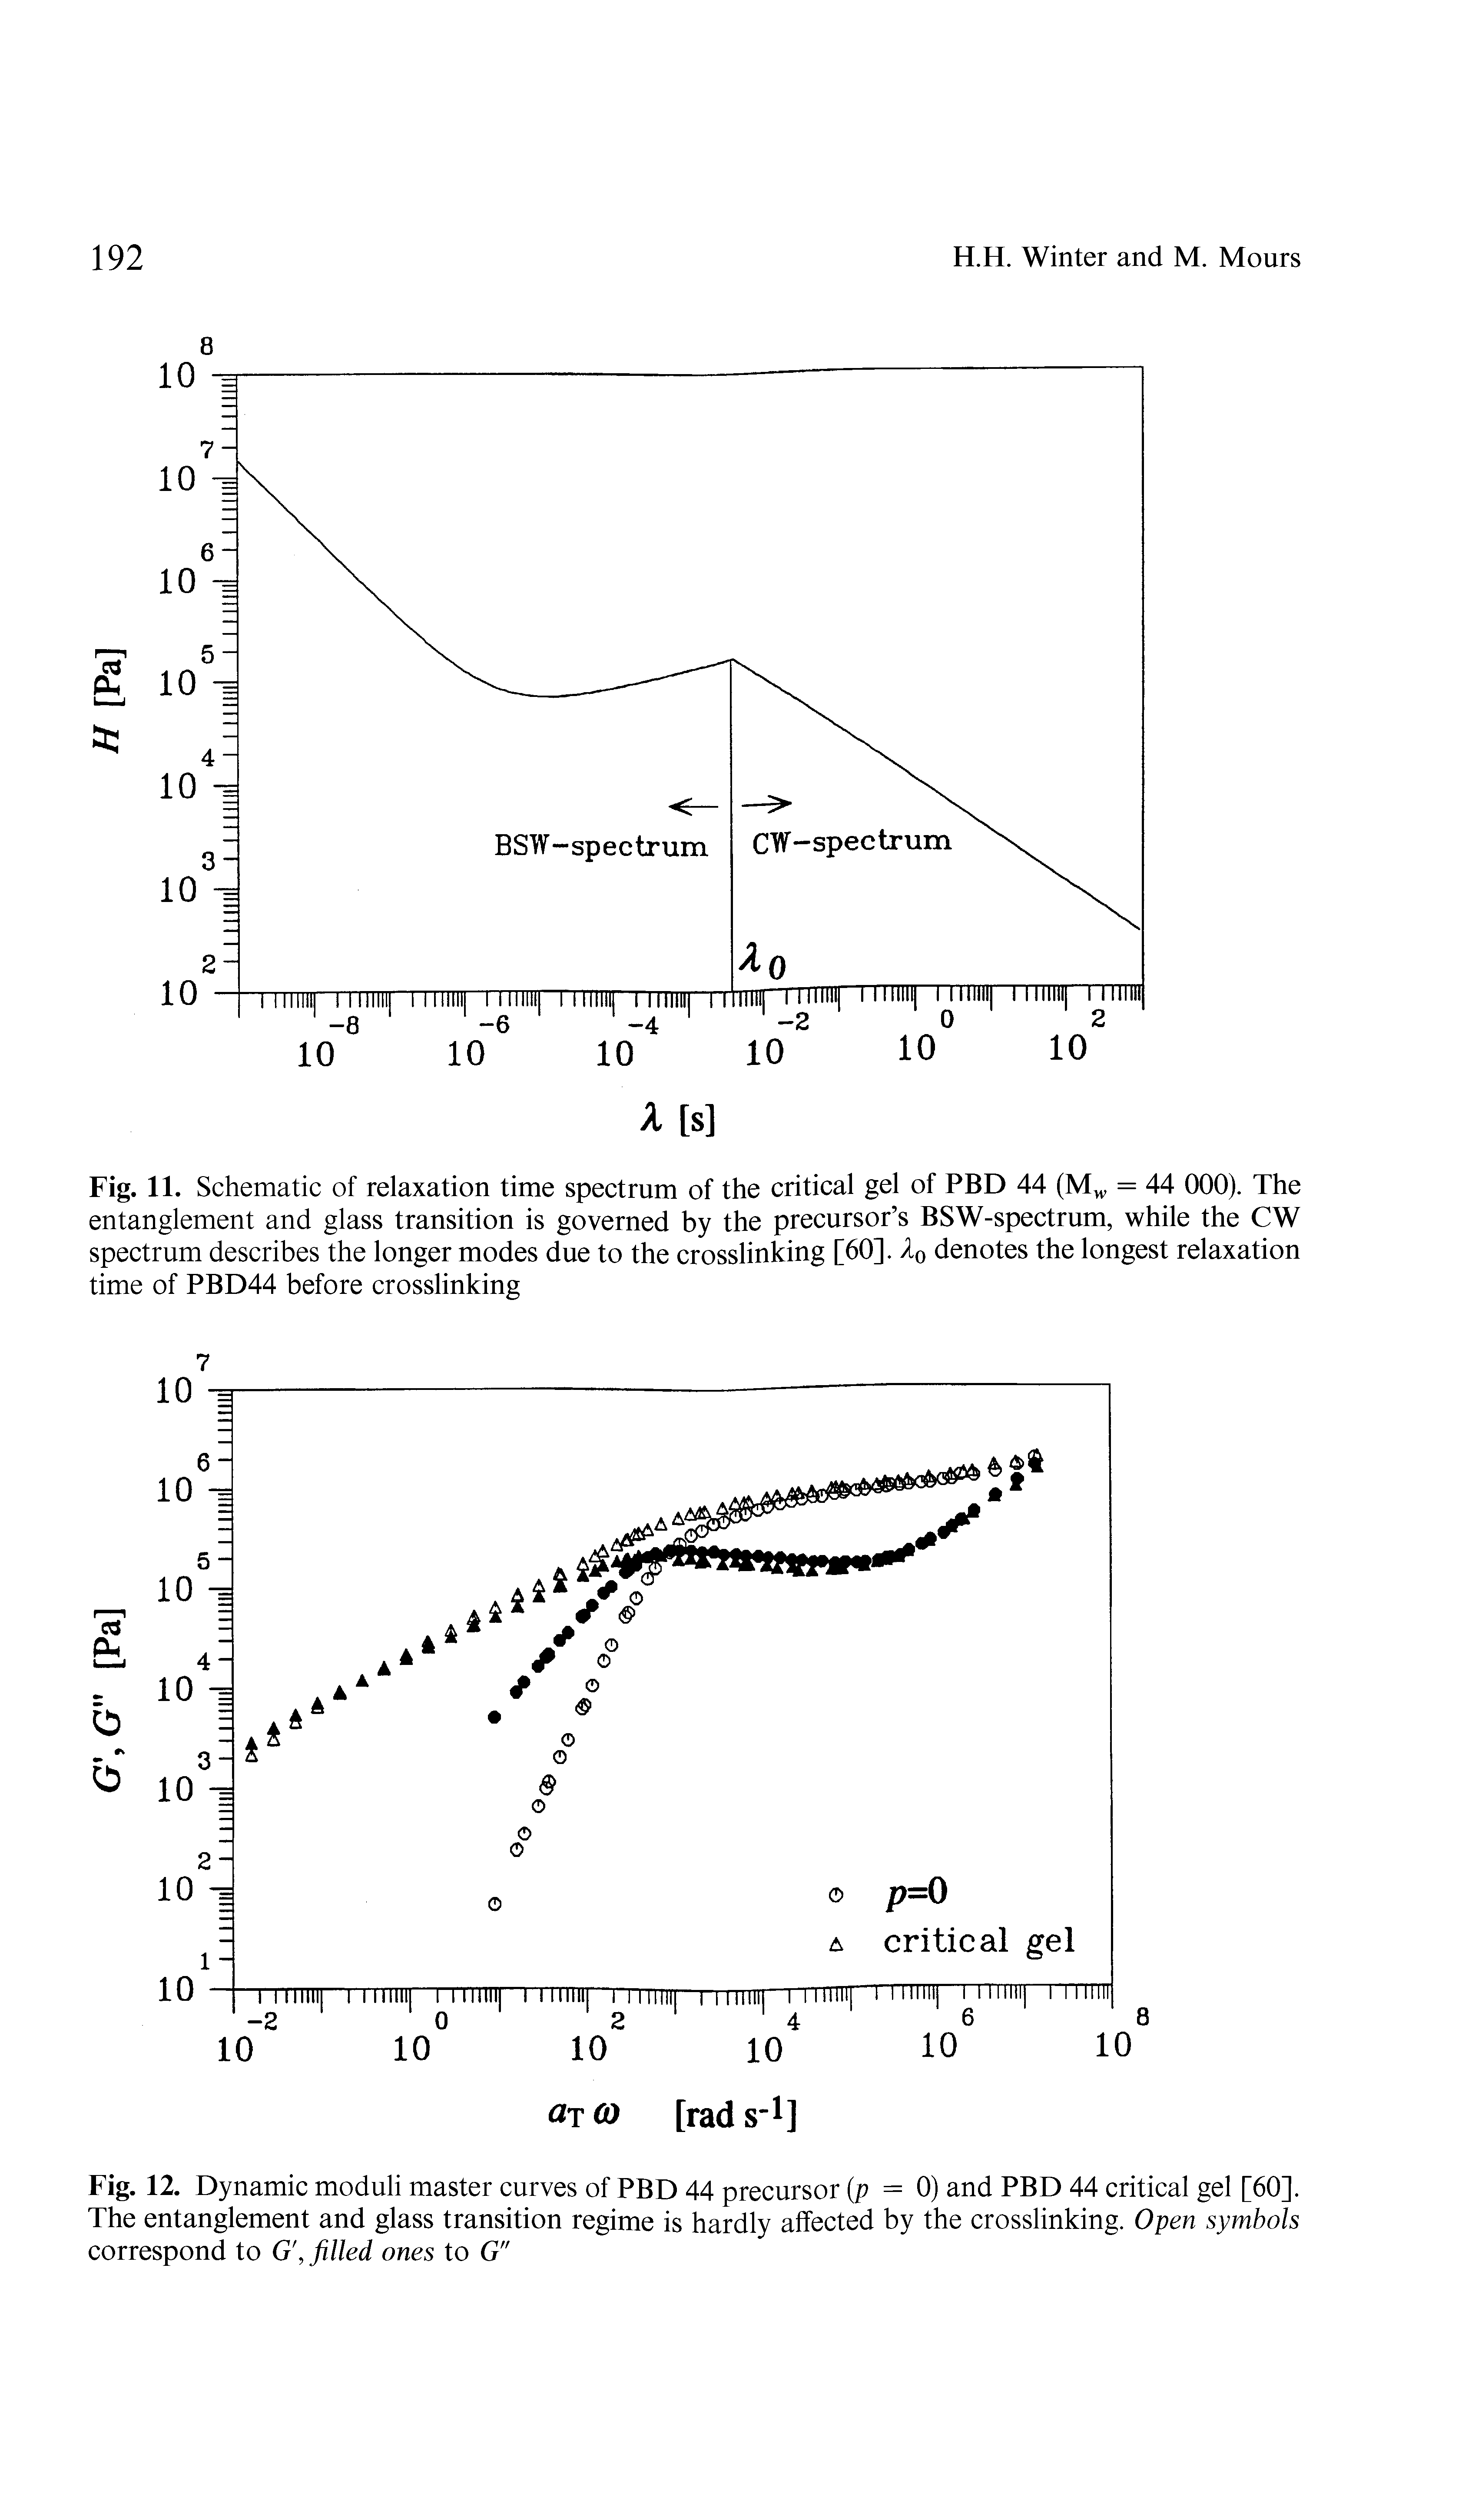 Fig. 11. Schematic of relaxation time spectrum of the critical gel of PBD 44 (Mw = 44 000). The entanglement and glass transition is governed by the precursor s BSW-spectrum, while the CW spectrum describes the longer modes due to the crosslinking [60]. denotes the longest relaxation time of PBD44 before crosslinking...